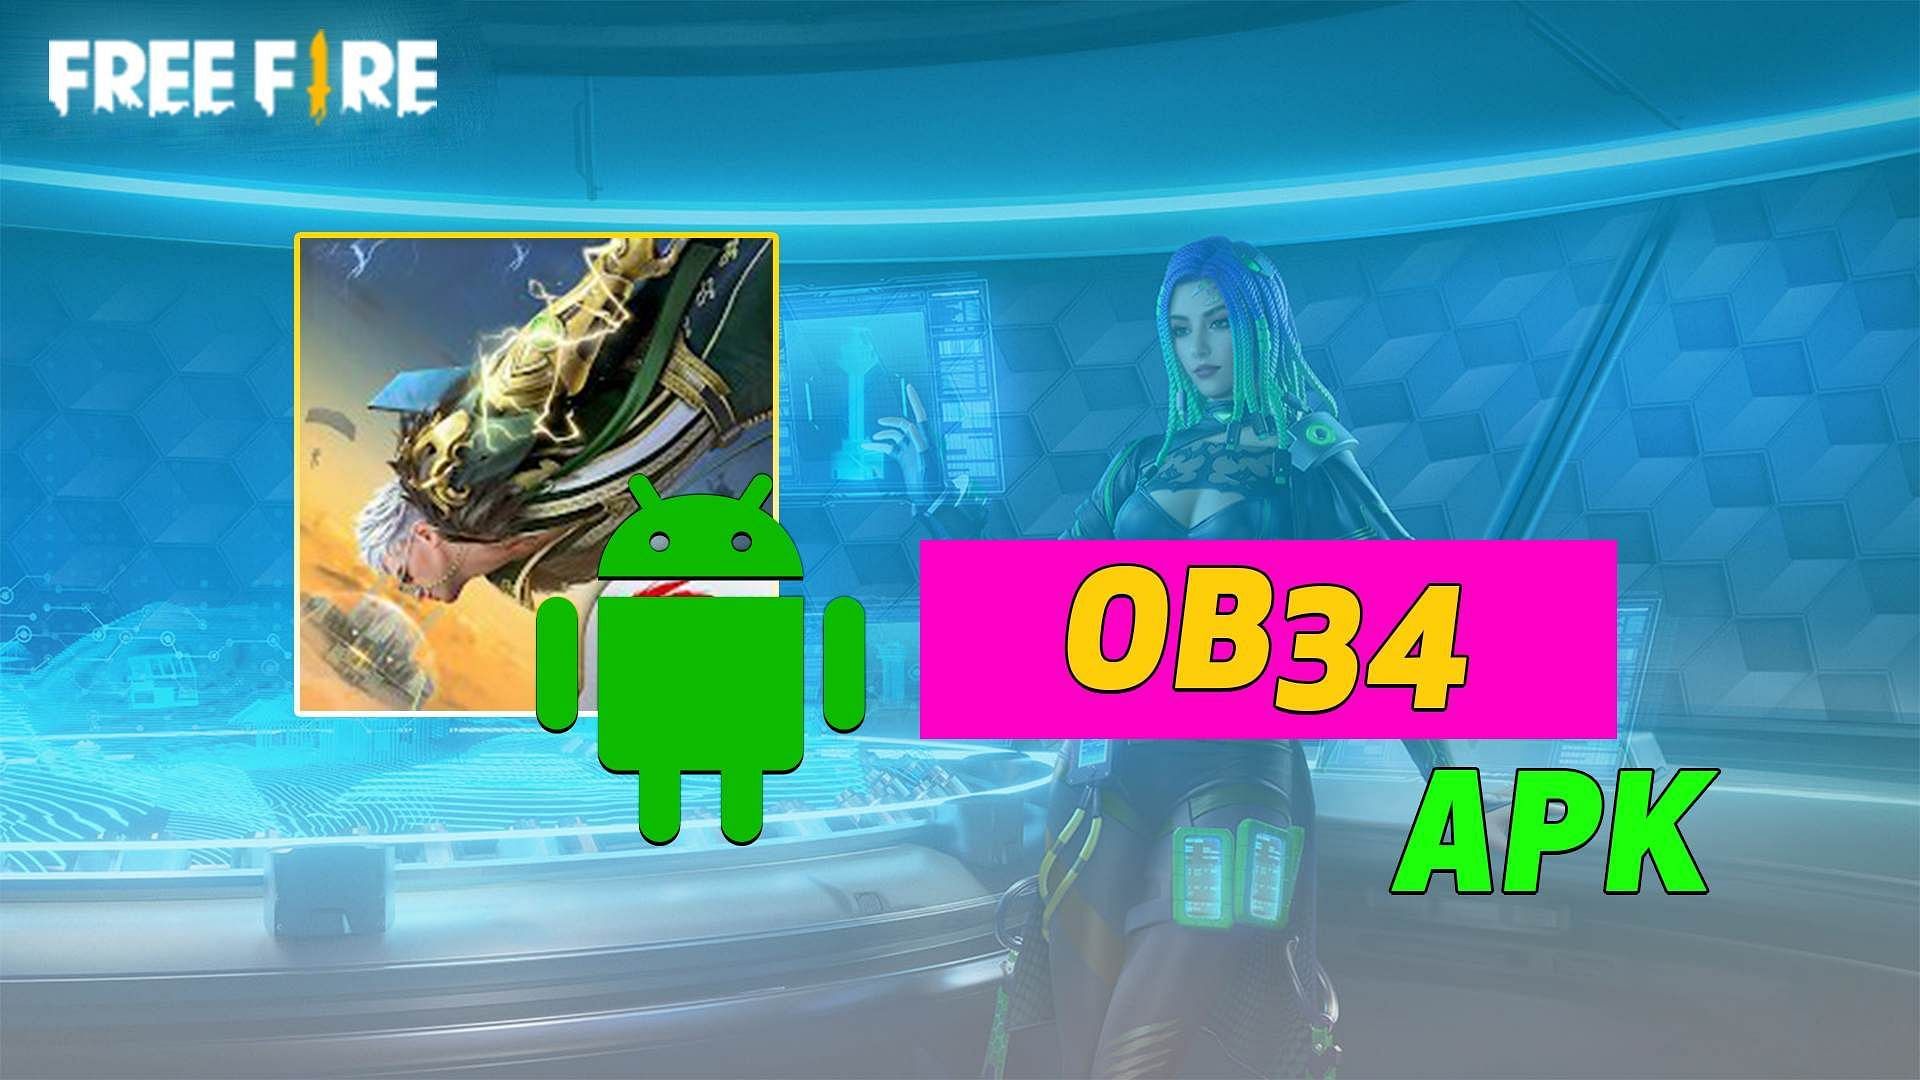 The OB34 Advance Server is much anticipated among global users (Image via Sportskeeda)